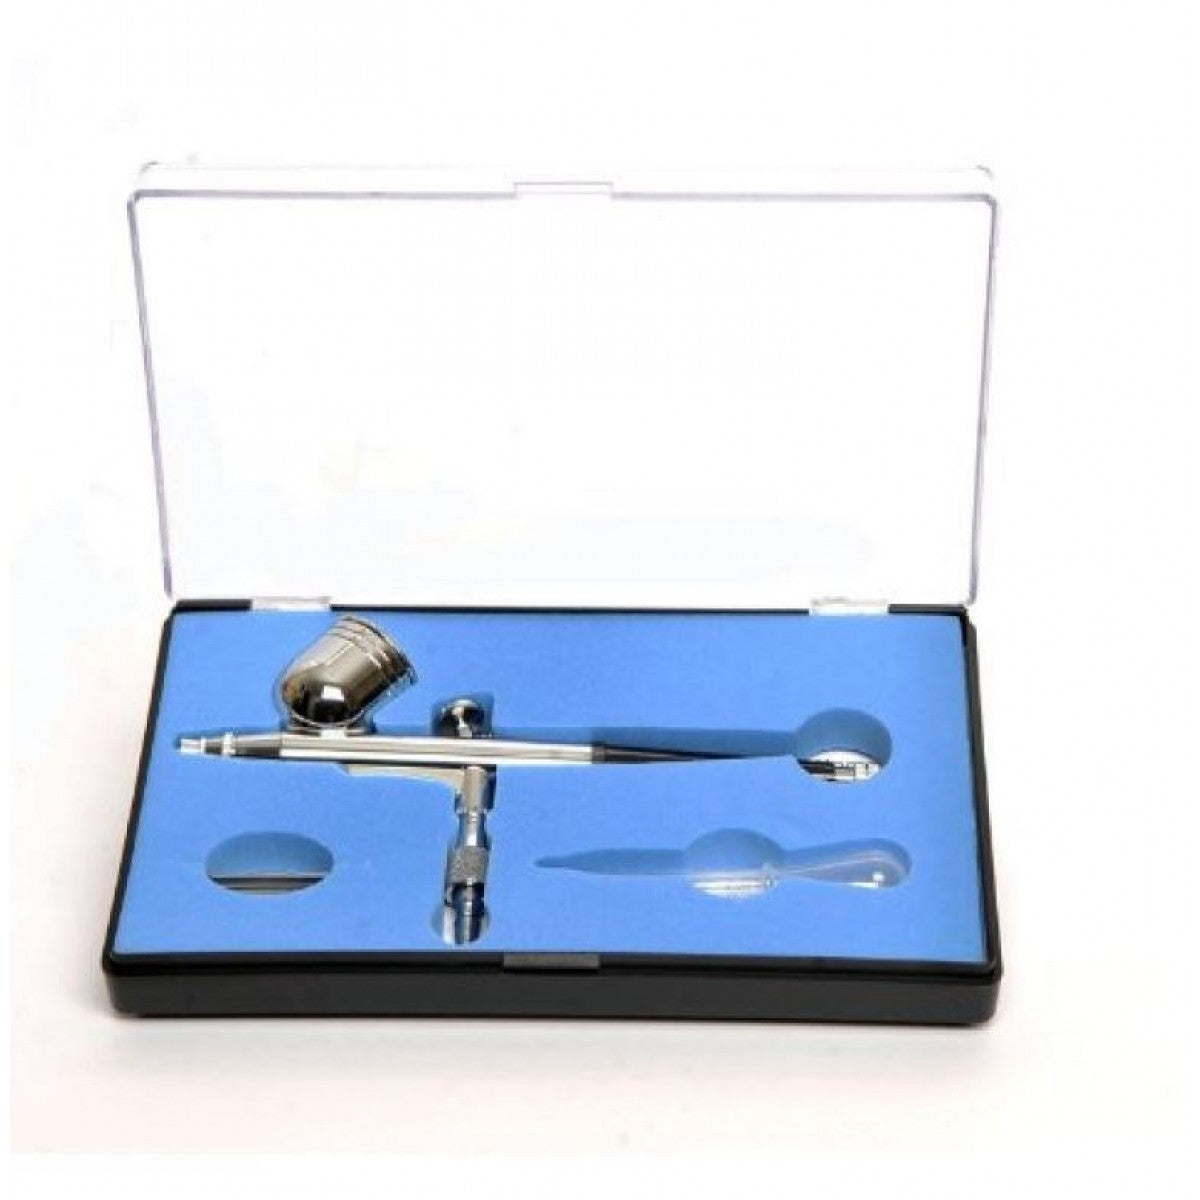 Hseng HS-30 0.3mm Dual Action Gravity Feed Airbrush Hseng AIRBRUSHES & COMPRESSORS